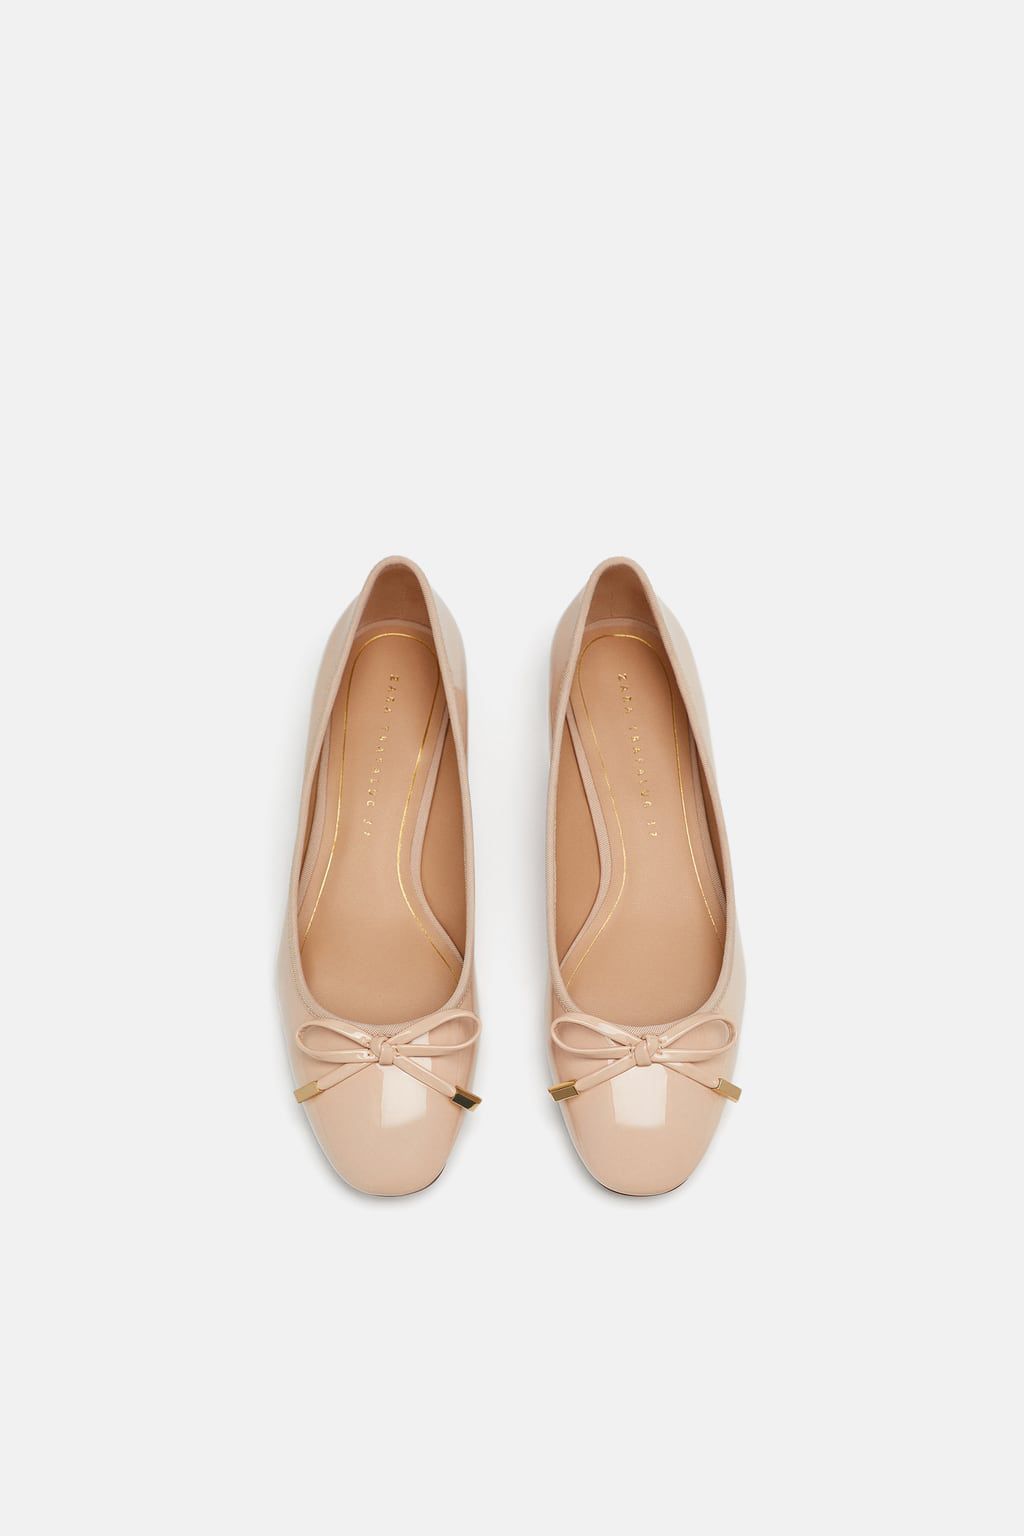 nude shoes heeled ballerinas with bow